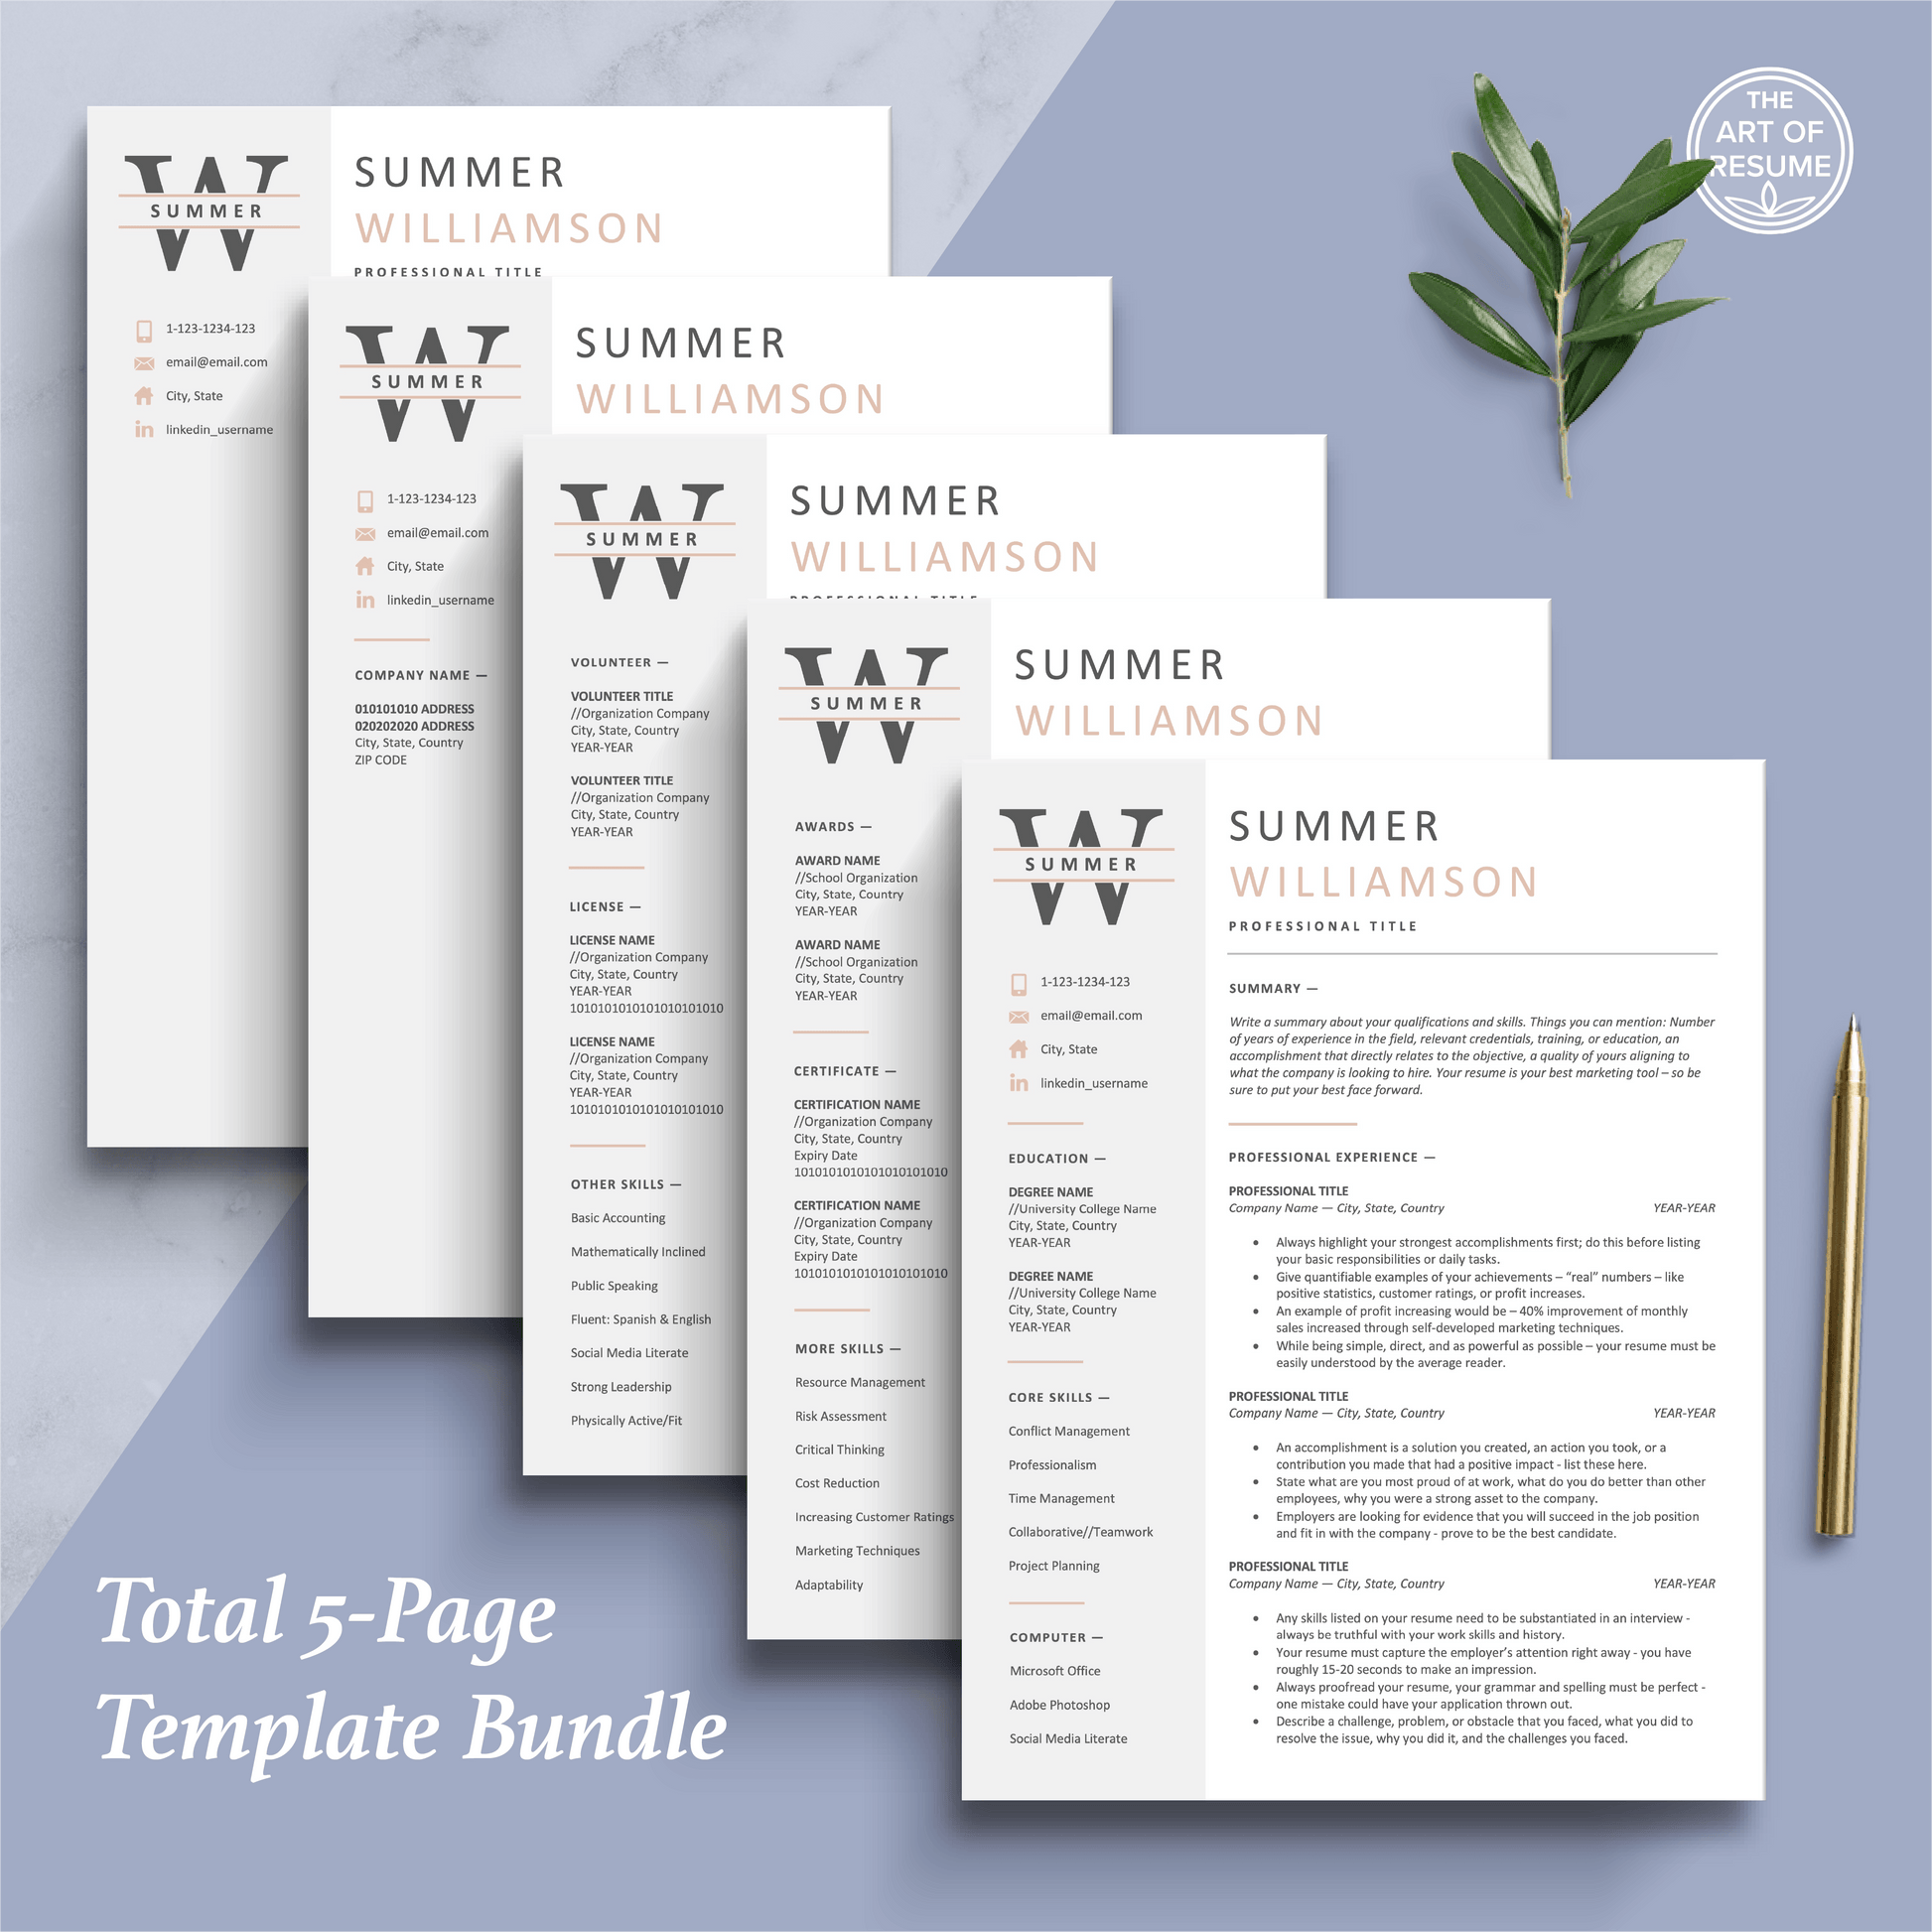 The Art of Resume Templates | Professional  Pink and Grey Resume CV Design Bundle including matching cover letter and reference page